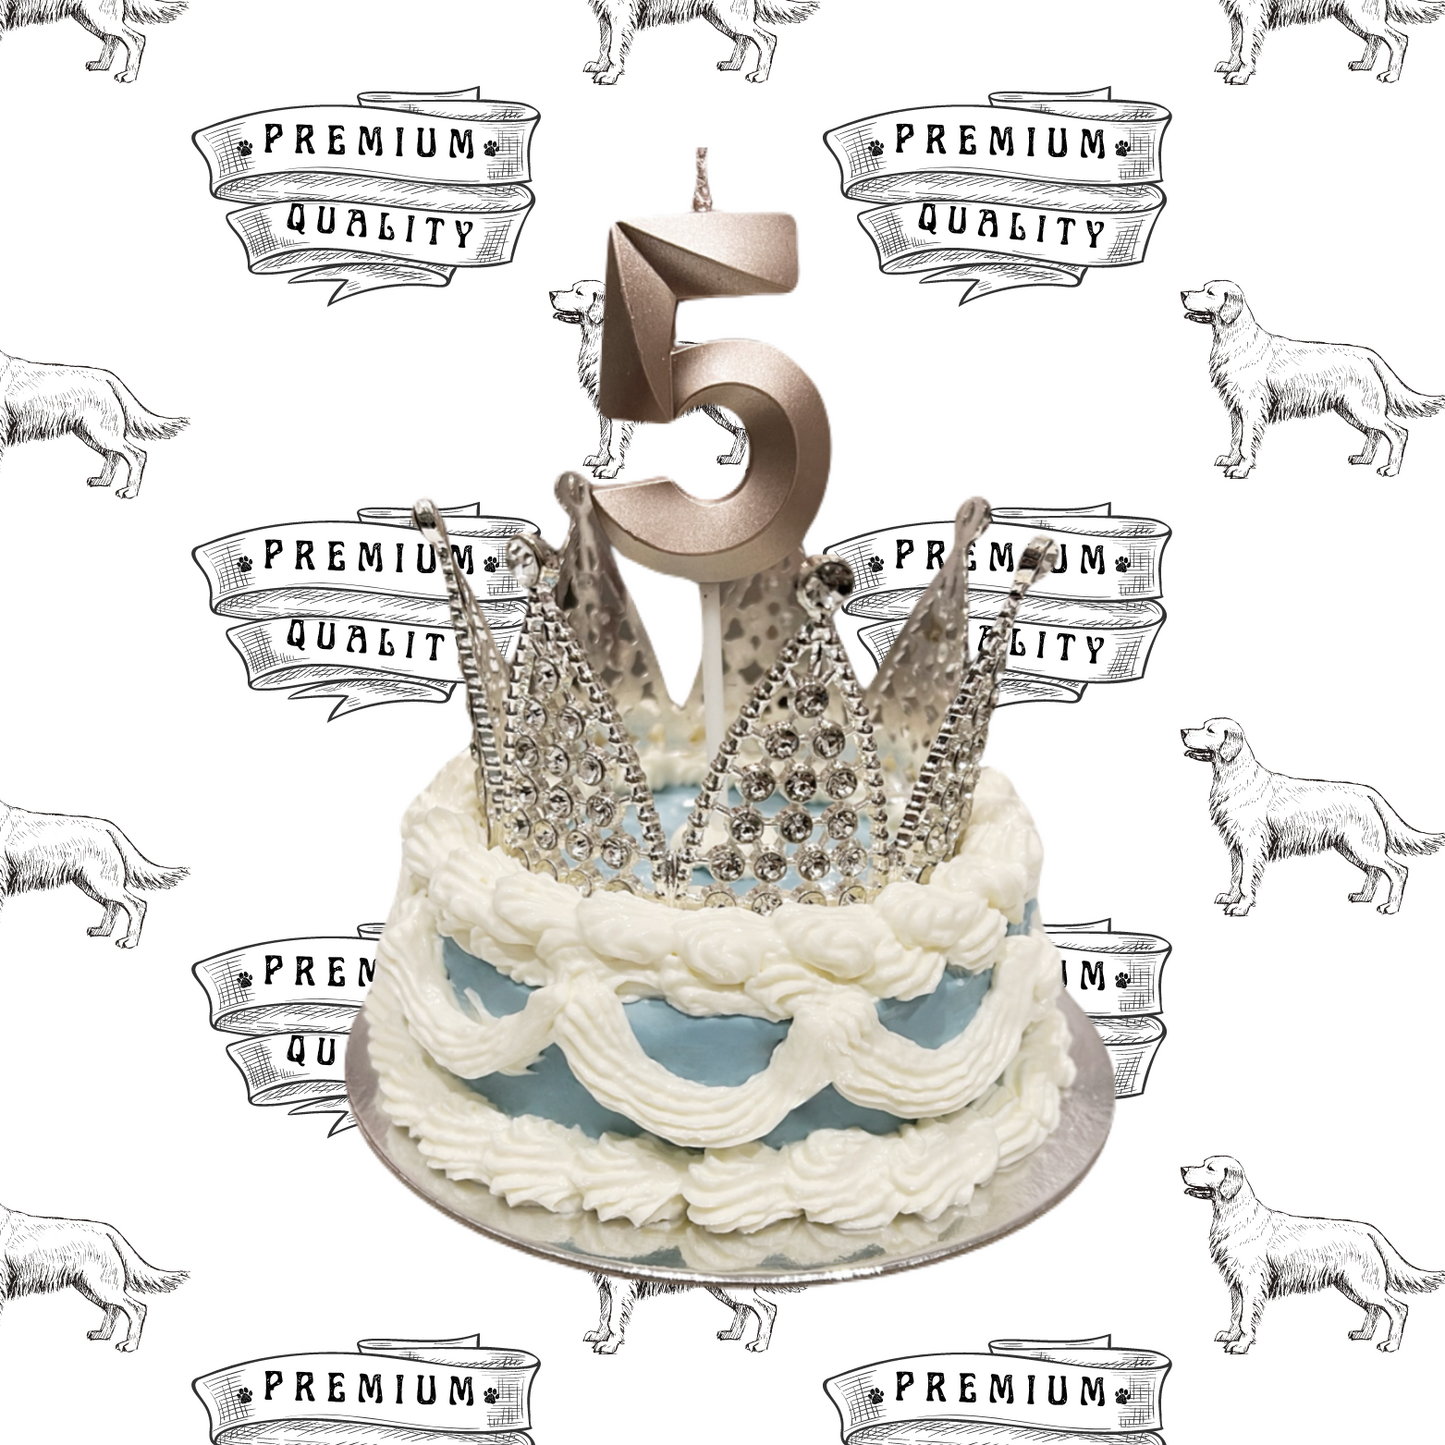 Crown Cake (No-Fat Cream Cheese Frosting)